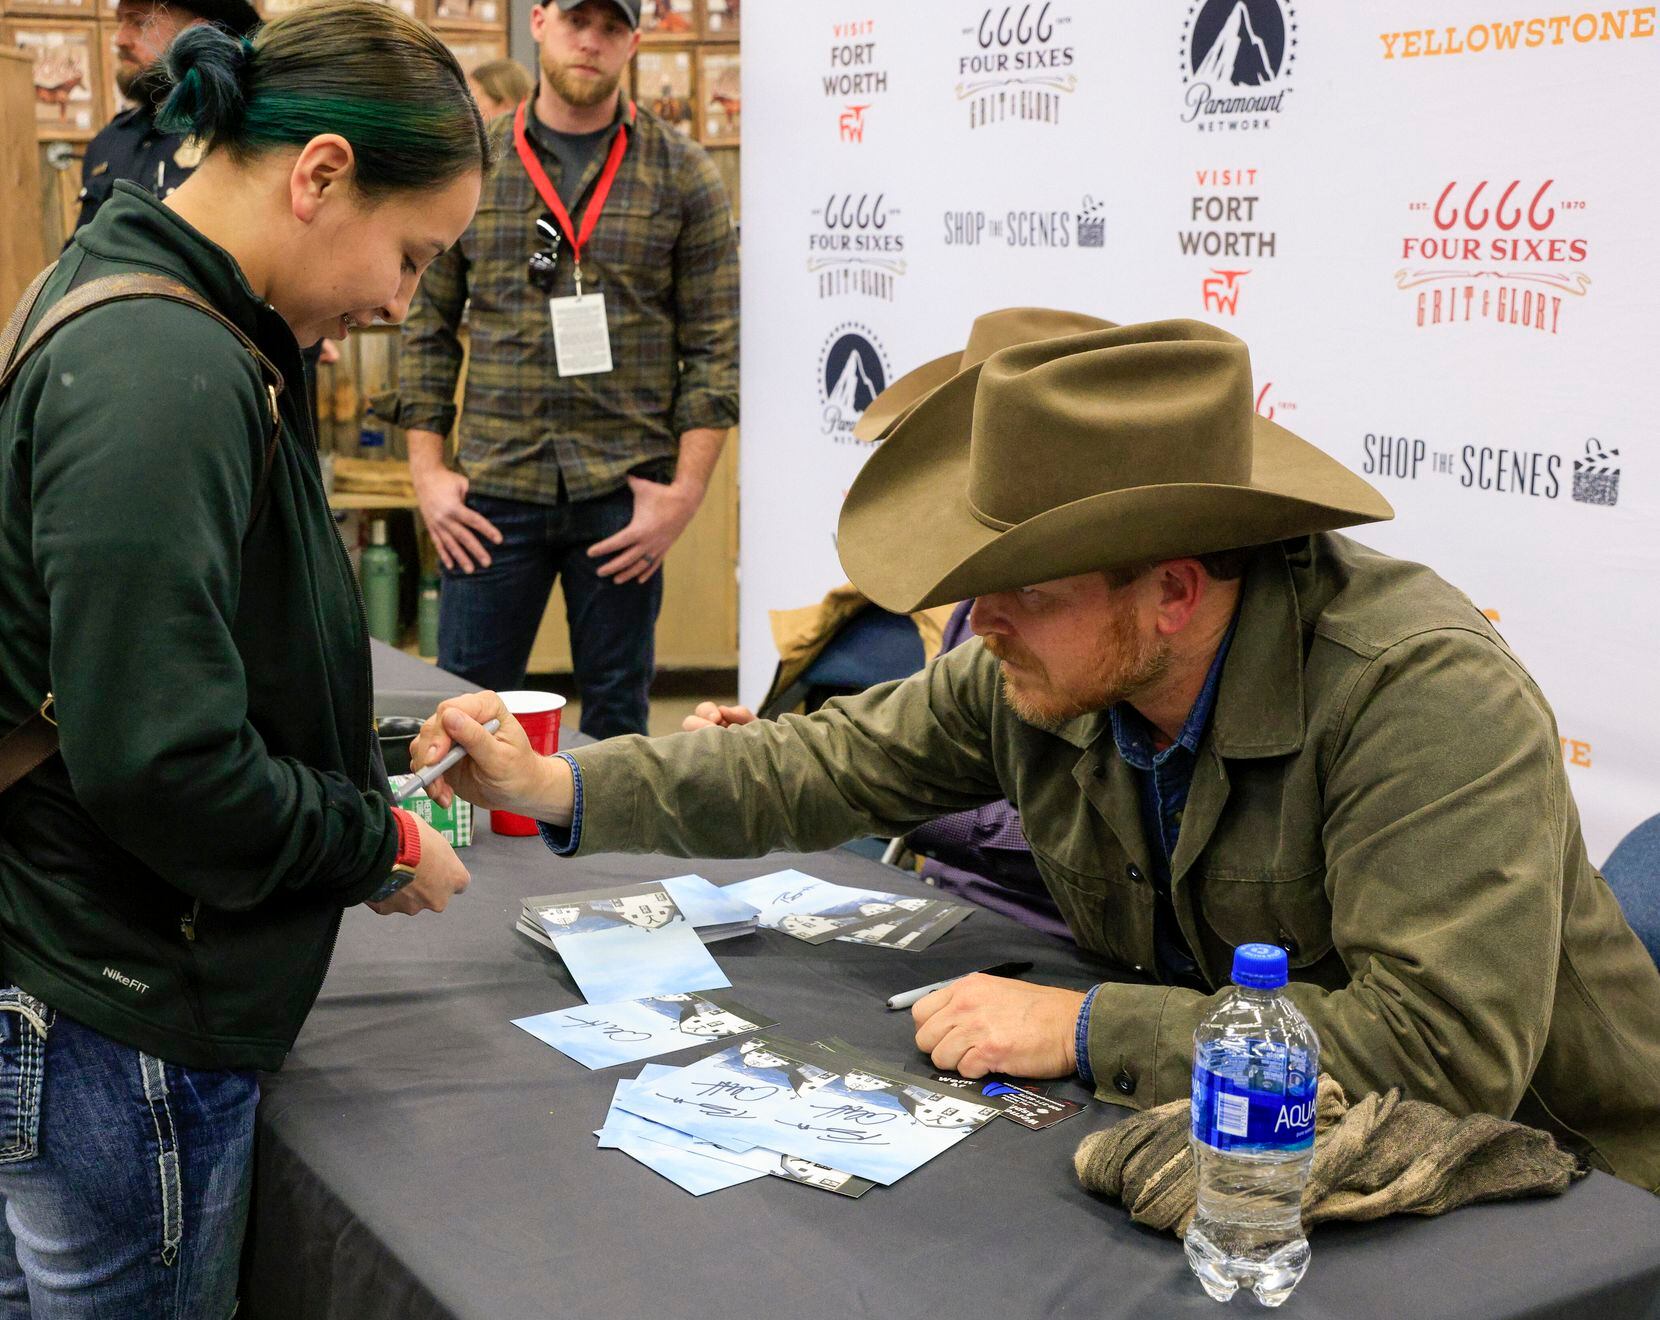 “Yellowstone” actor Cole Hauser signs the shirt of Tanya Garza.